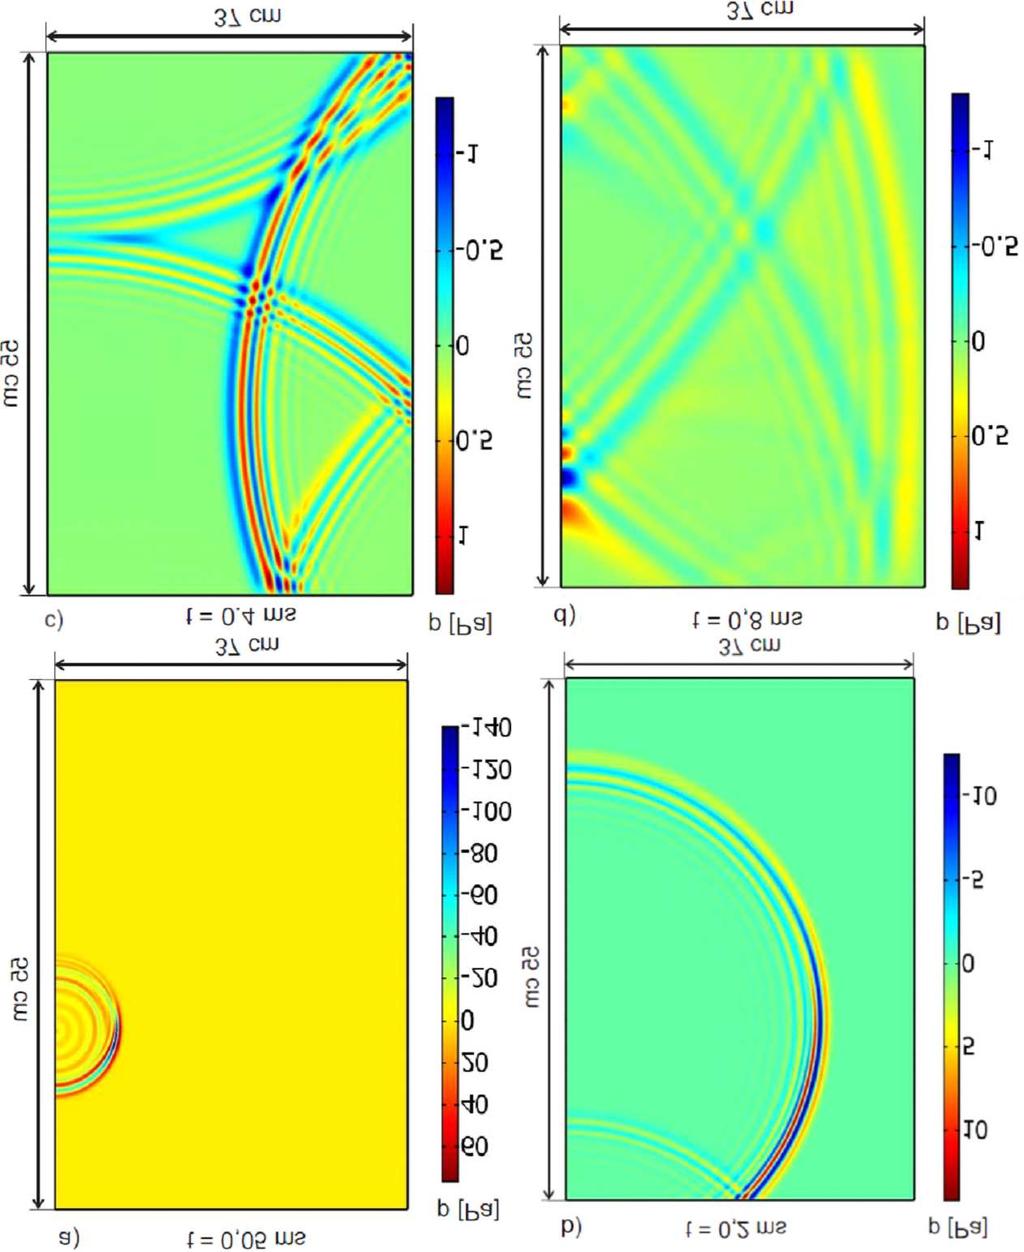 Mathematical Model and Numerical Analysis of AE Wave... 771 COMSOL Multiphysics, which applies the finite element method. The object was discretized with a mesh of a single element not bigger than 2.